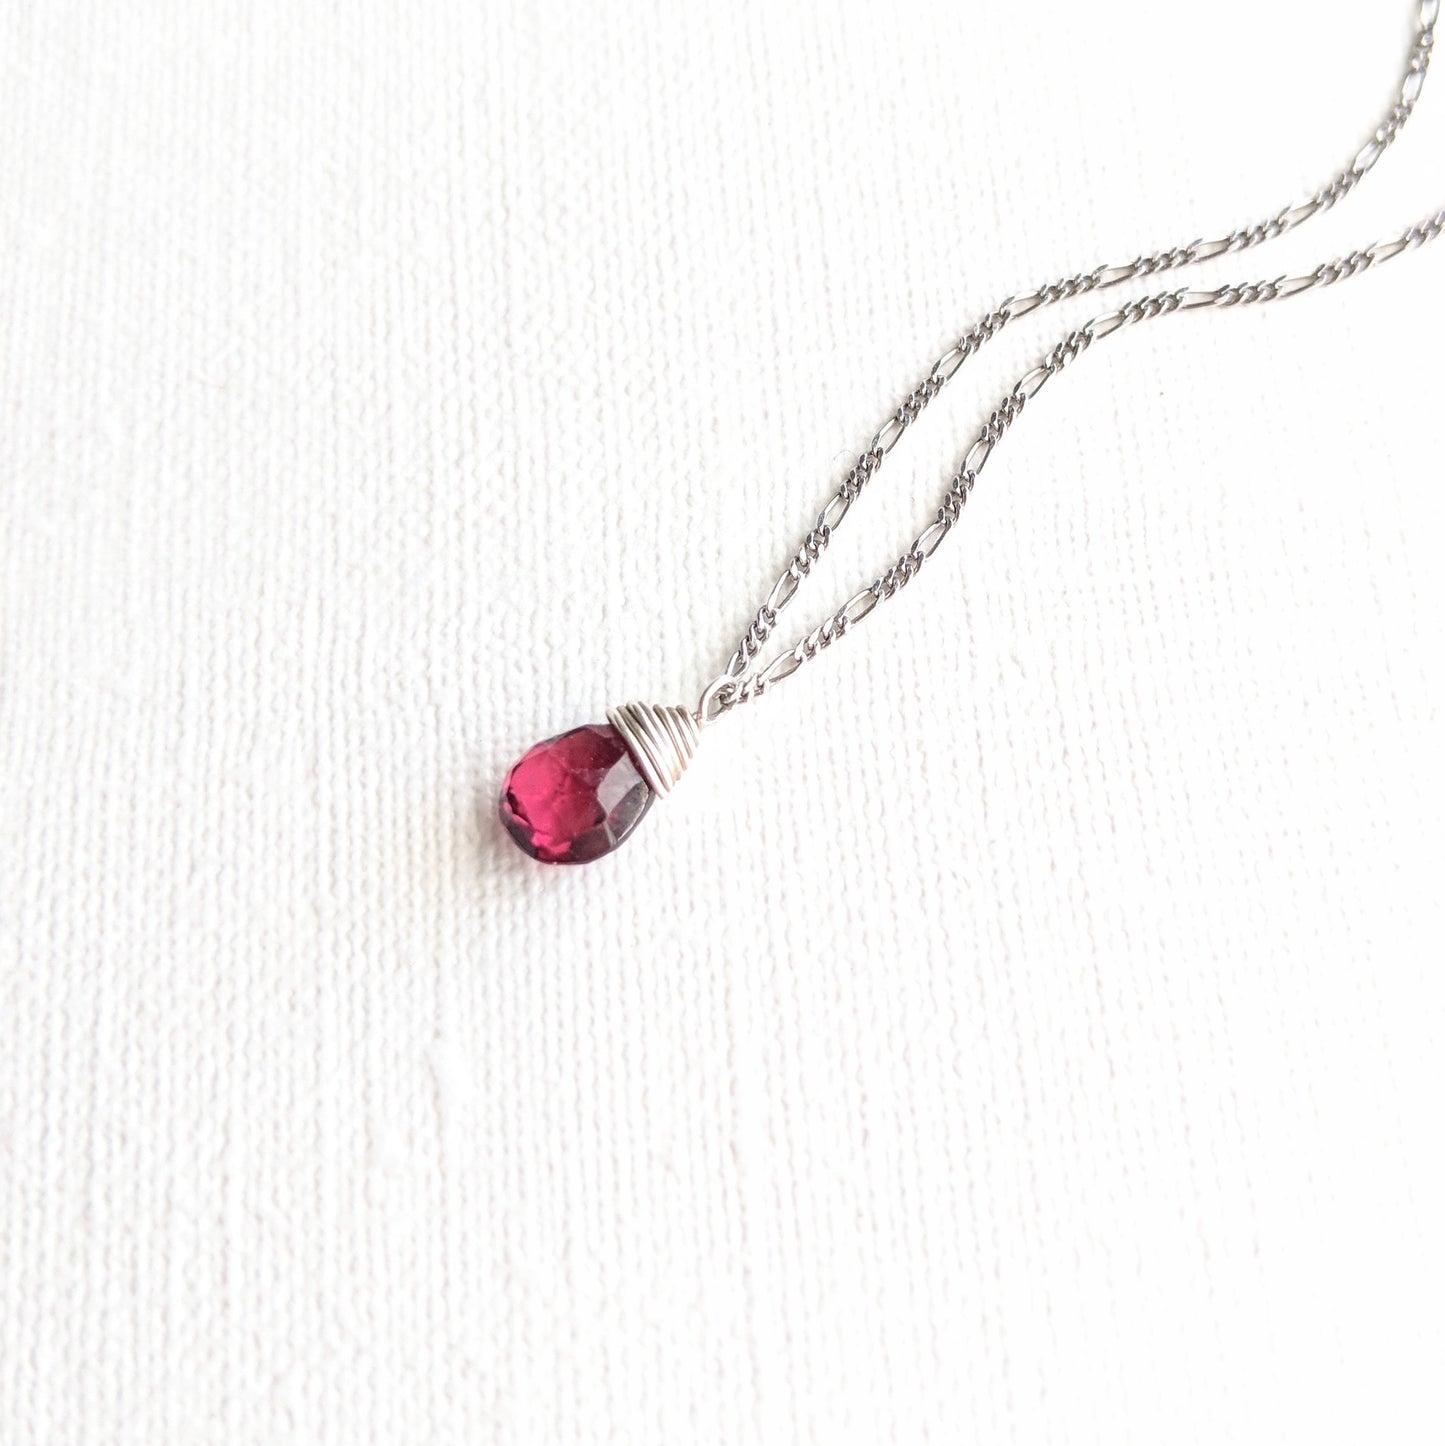 Moon & Milk - 925 sterling silver dainty chain necklace with a wire-wrapped rhodolite garnet pear gemstone in wine color